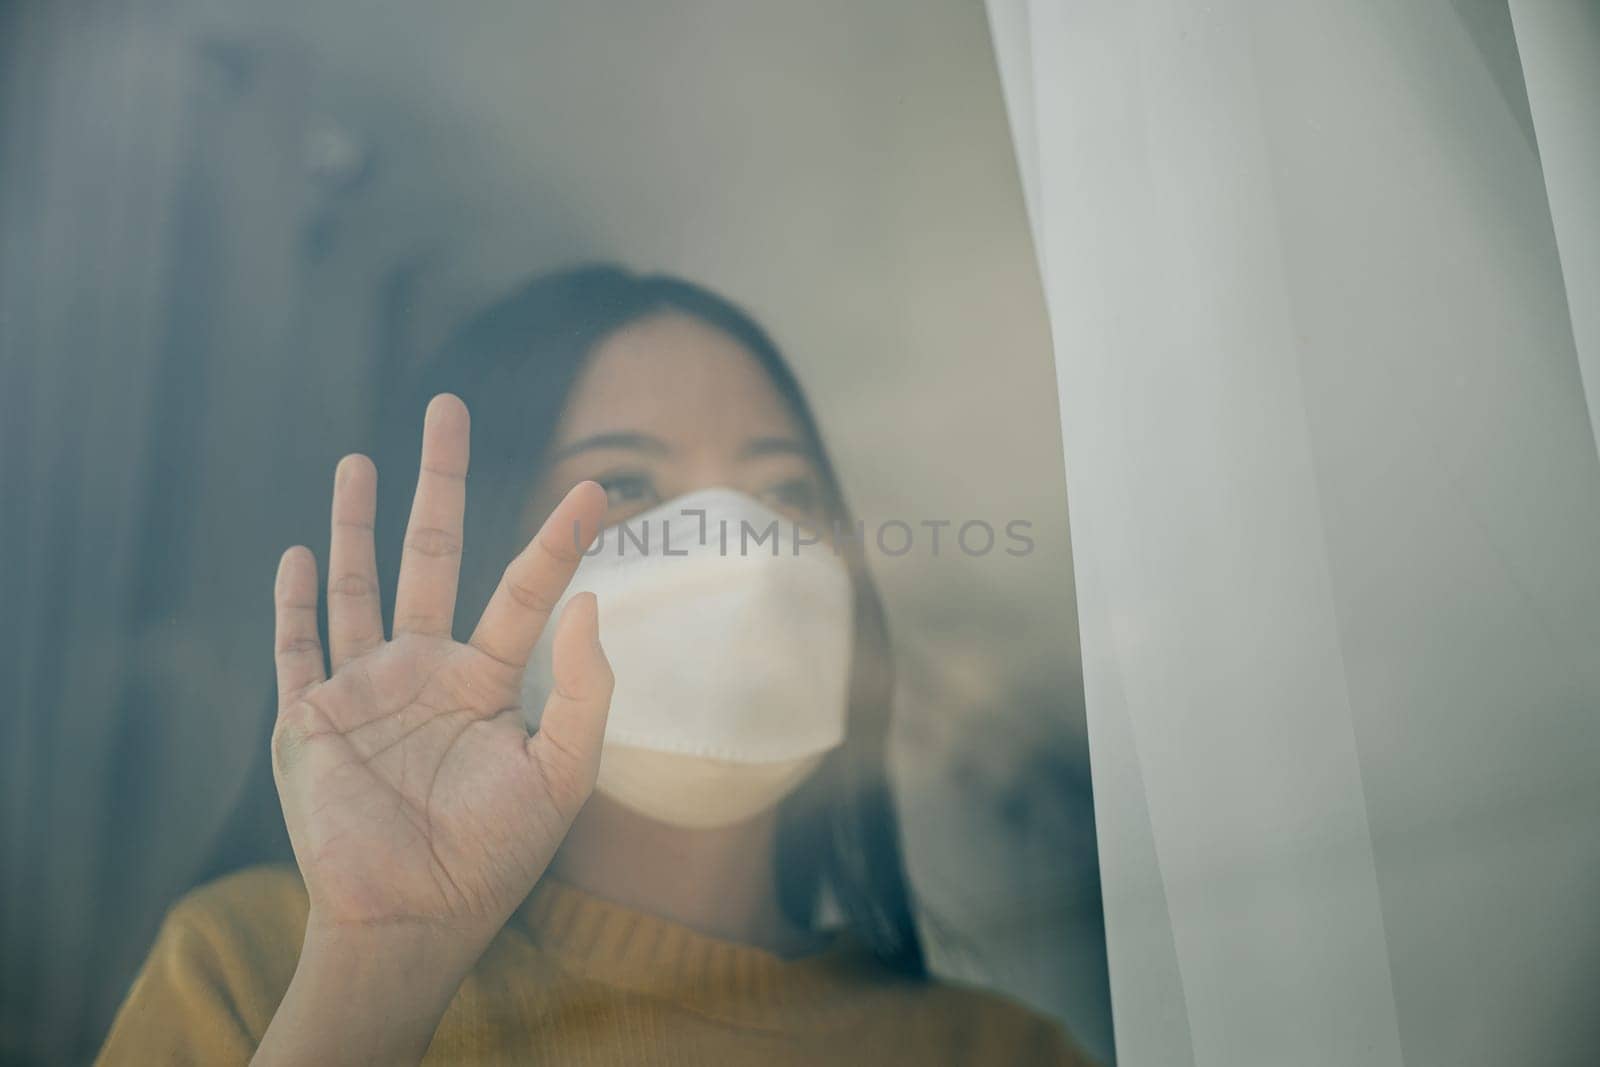 Highlighting self-isolation, Woman in a medical mask stays at home emphasizing COVID-19 prevention during the outbreak situation and the concept of home quarantine.